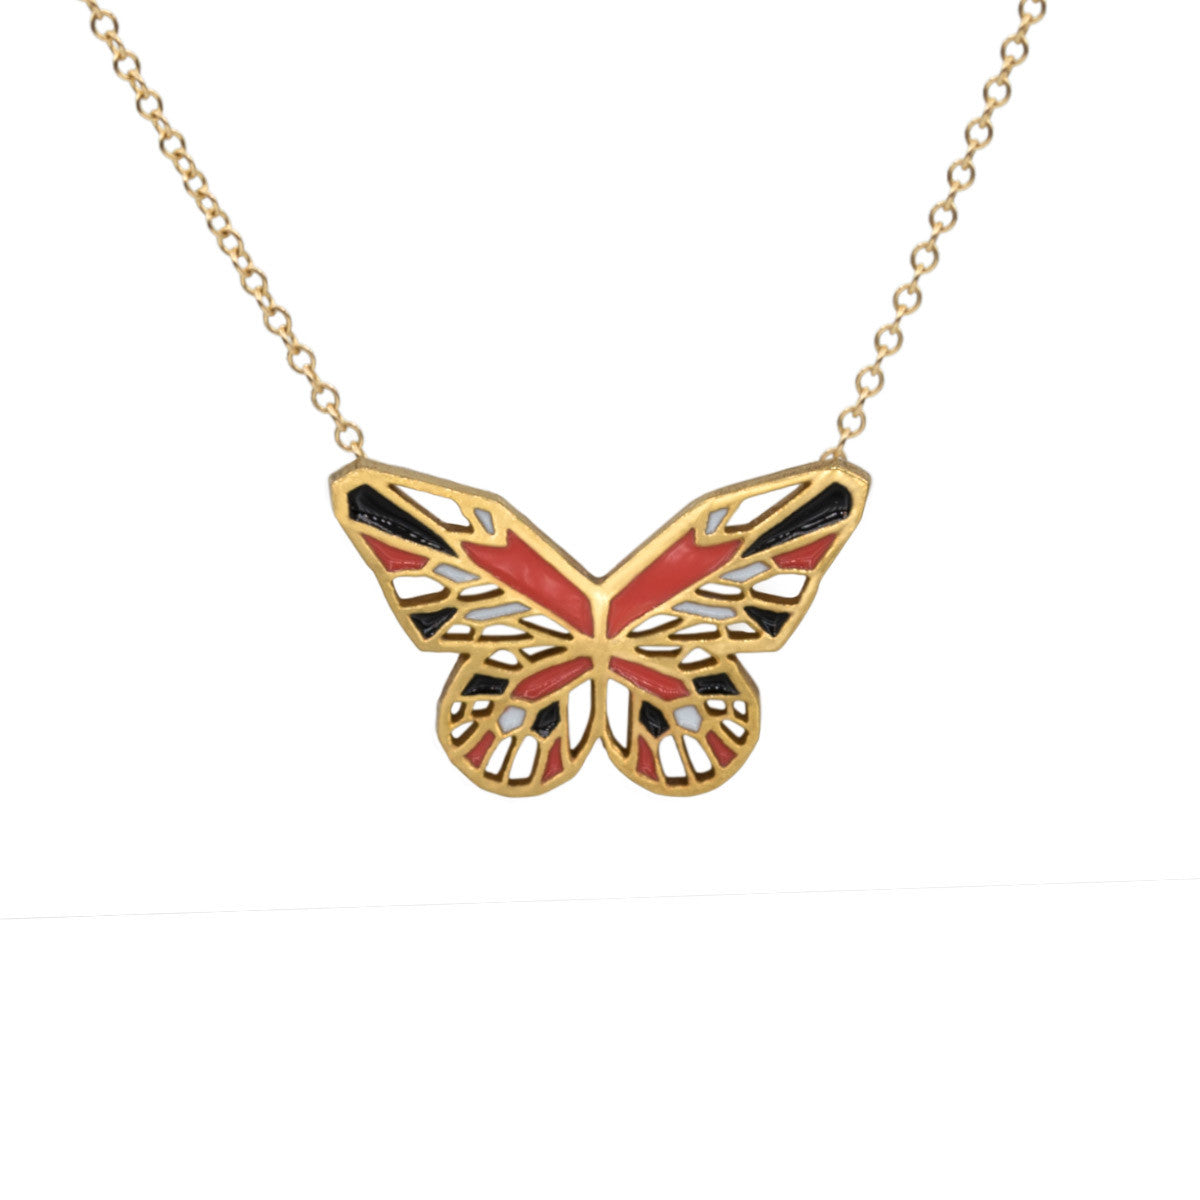 Monarch Butterfly necklace gold